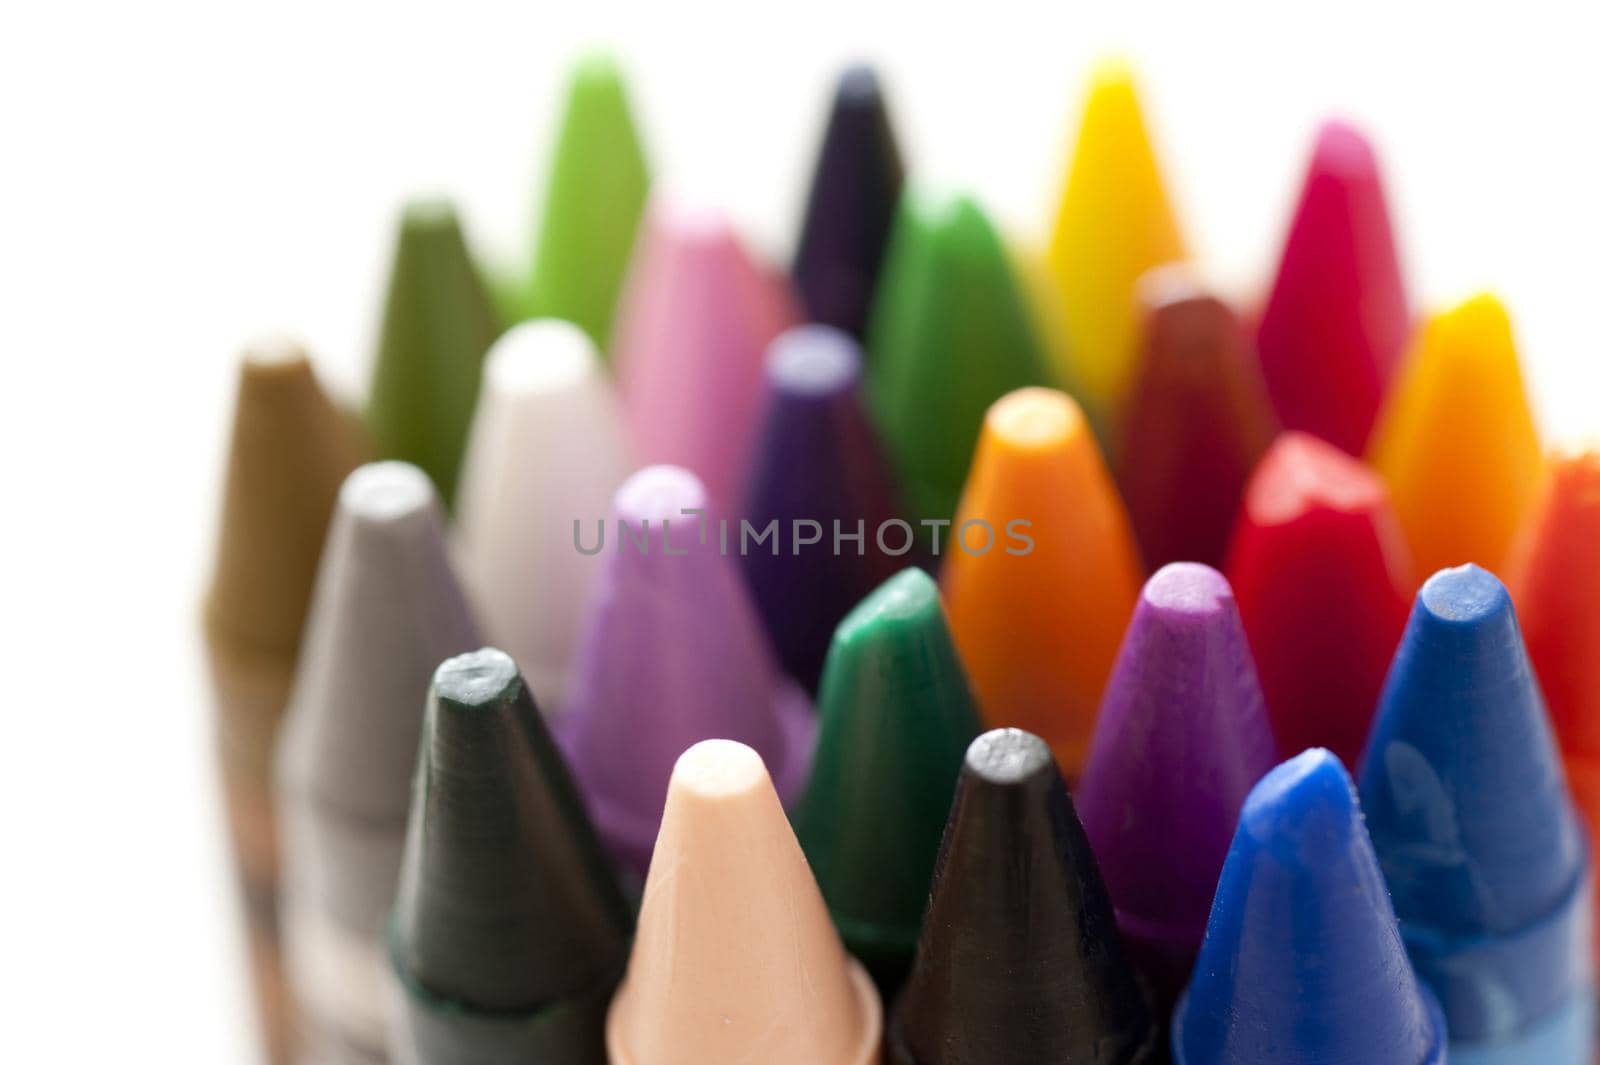 Bundle of colorful wax crayons by sanisra